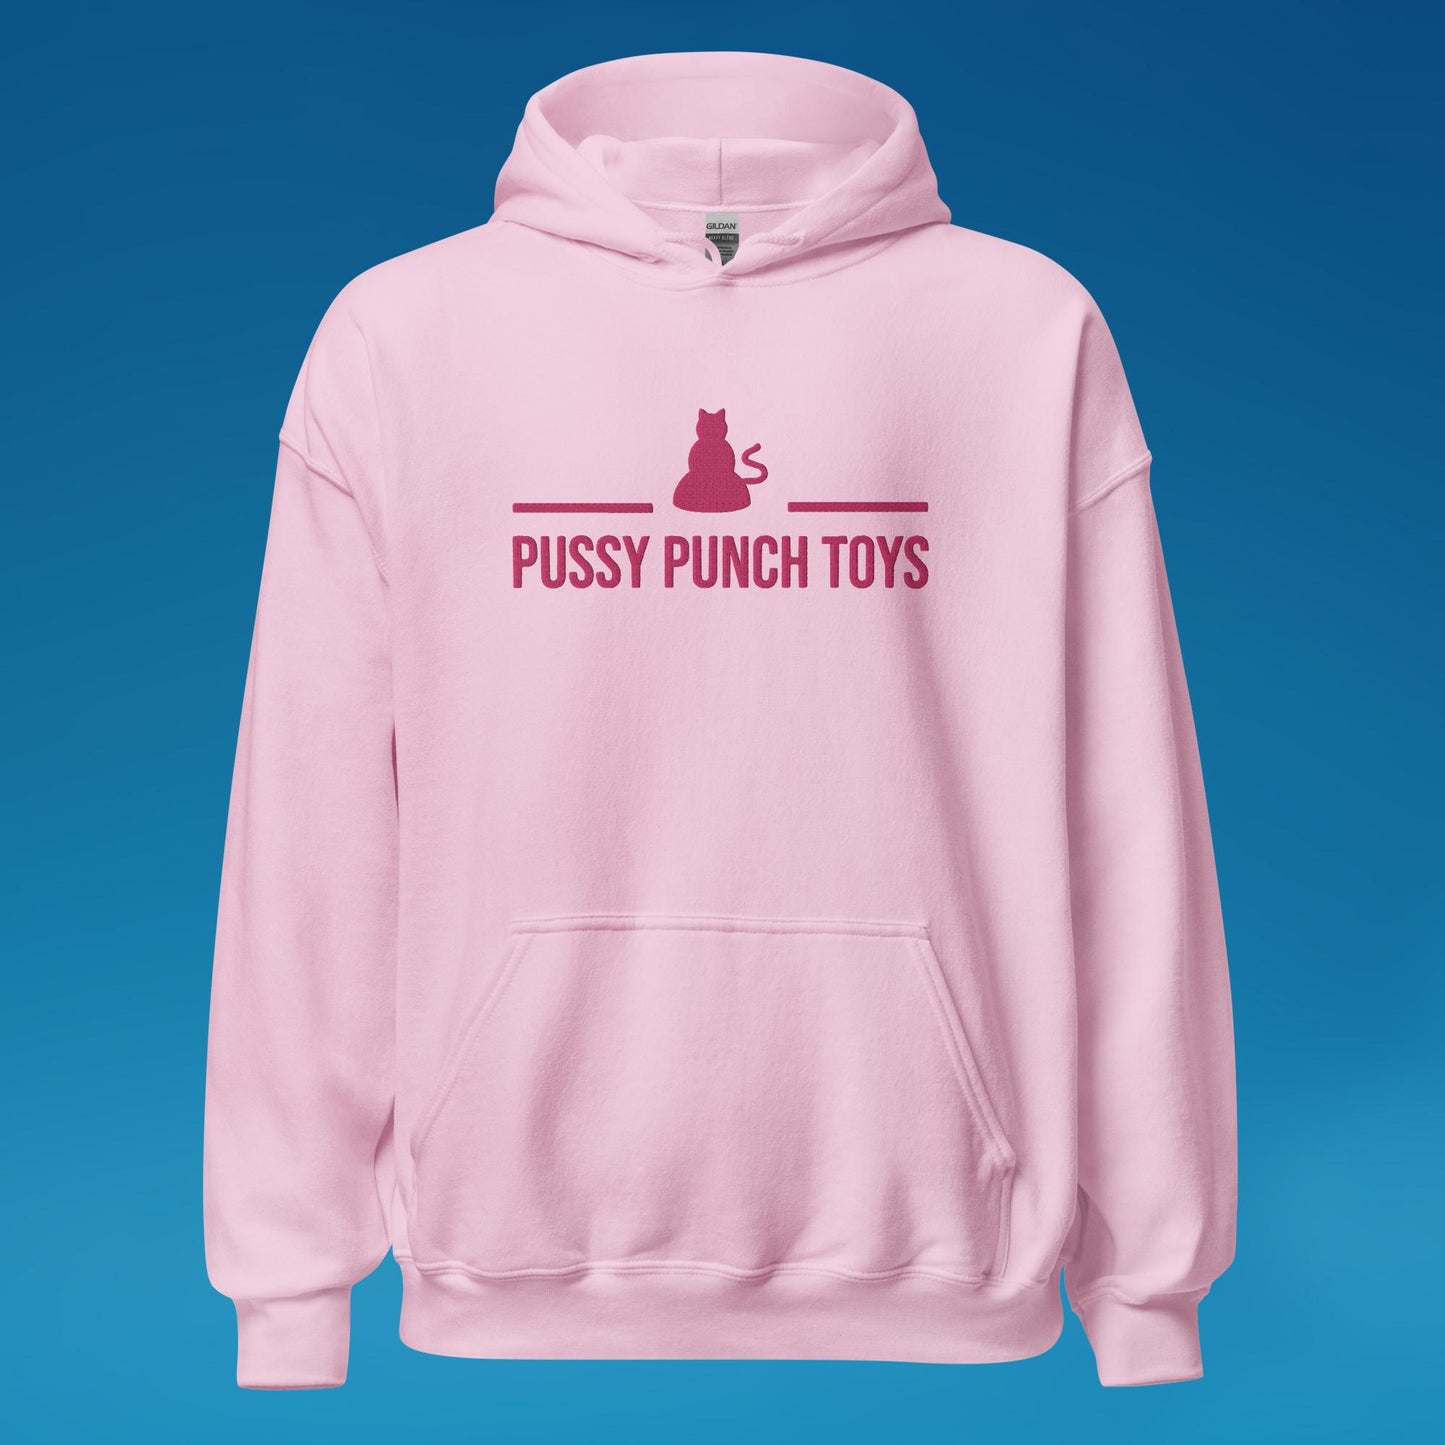 Pussy Punch Toys Hoody (embroidered)